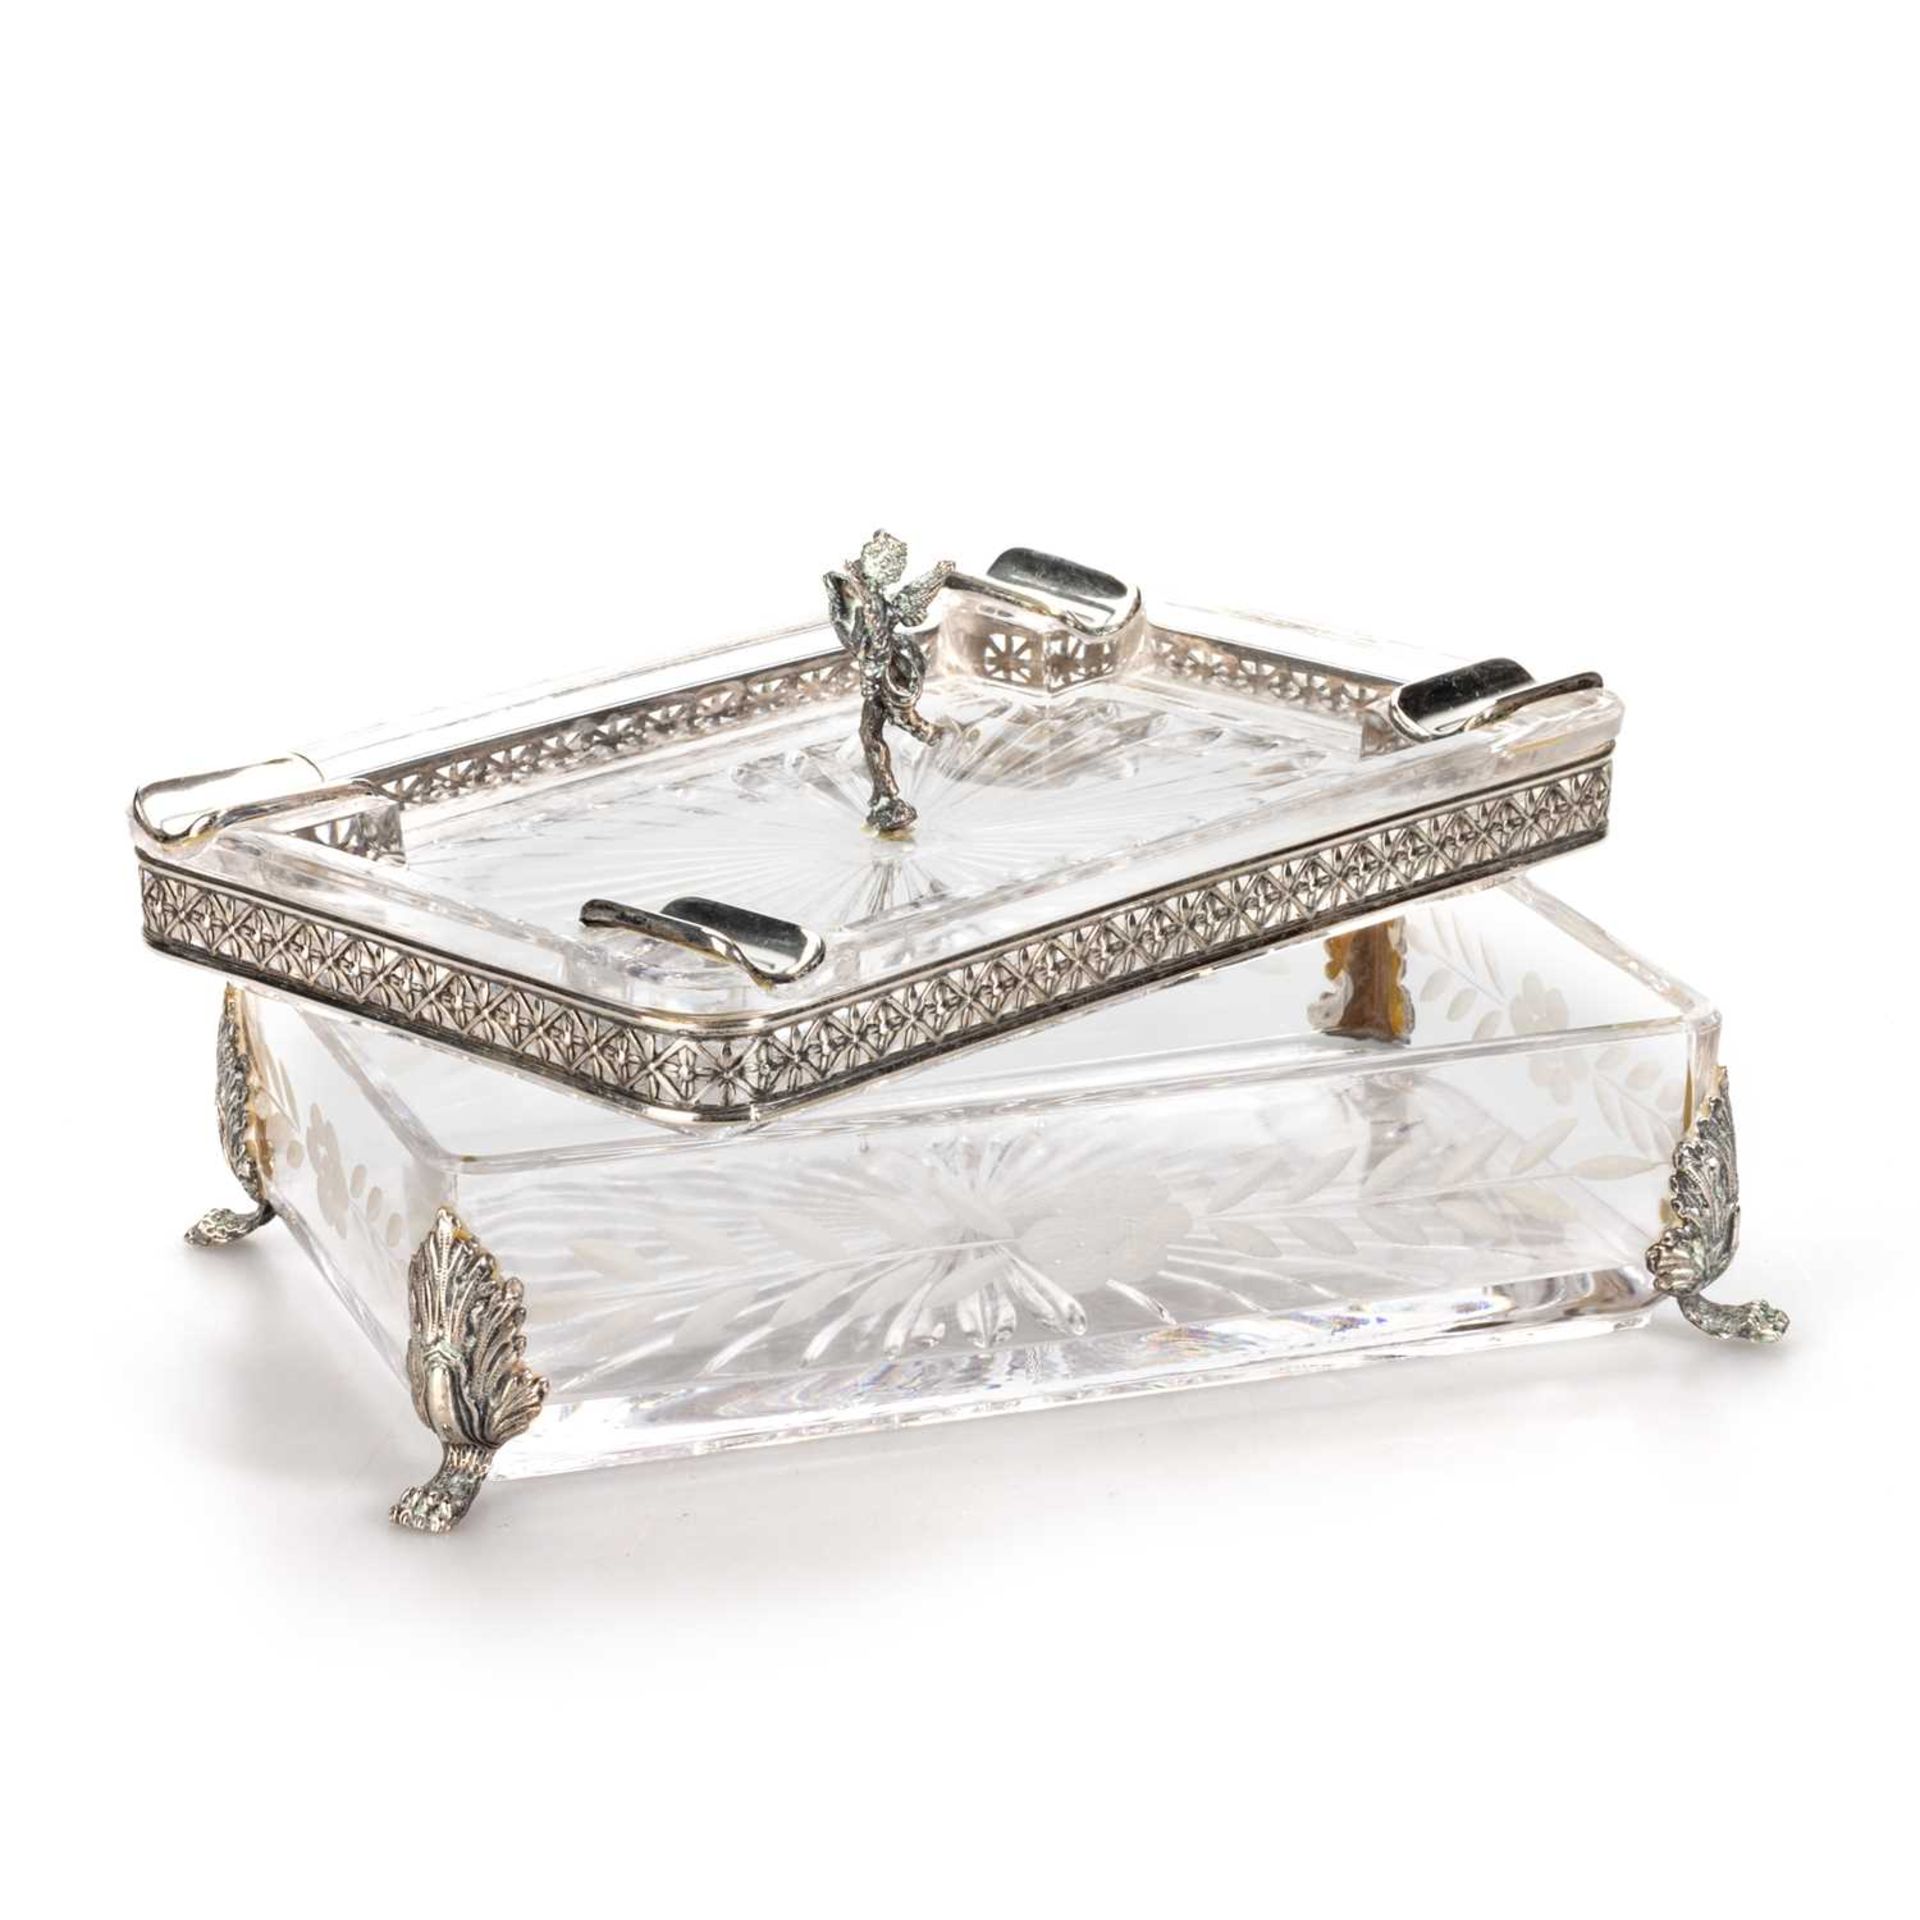 AN ITALIAN SILVER-MOUNTED GLASS CIGARETTE BOX - Image 2 of 3